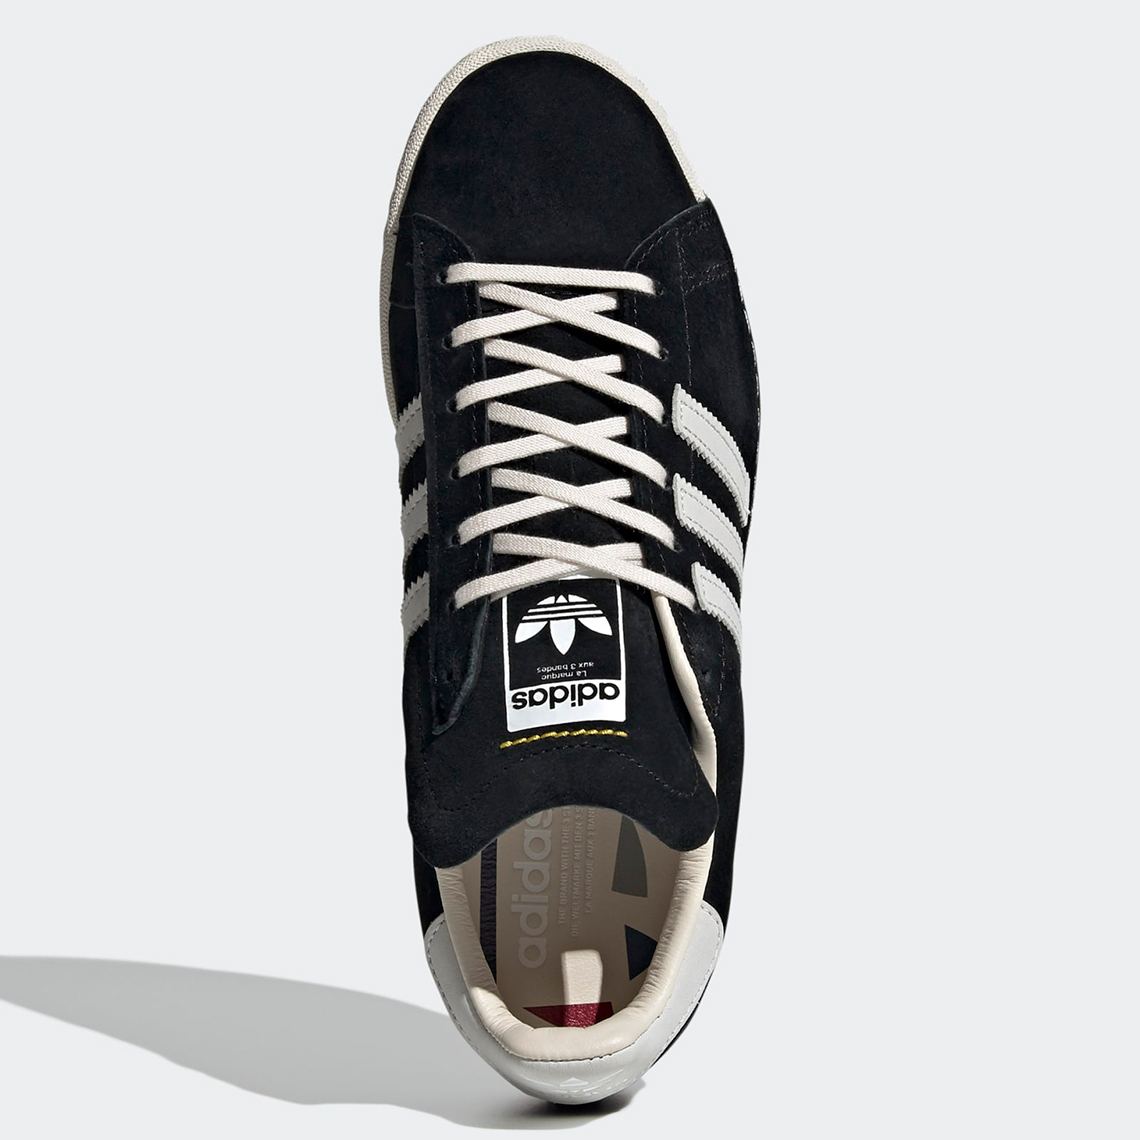 RECOUTURE adidas Campus 80 White Black Release Date | SneakerNews.com